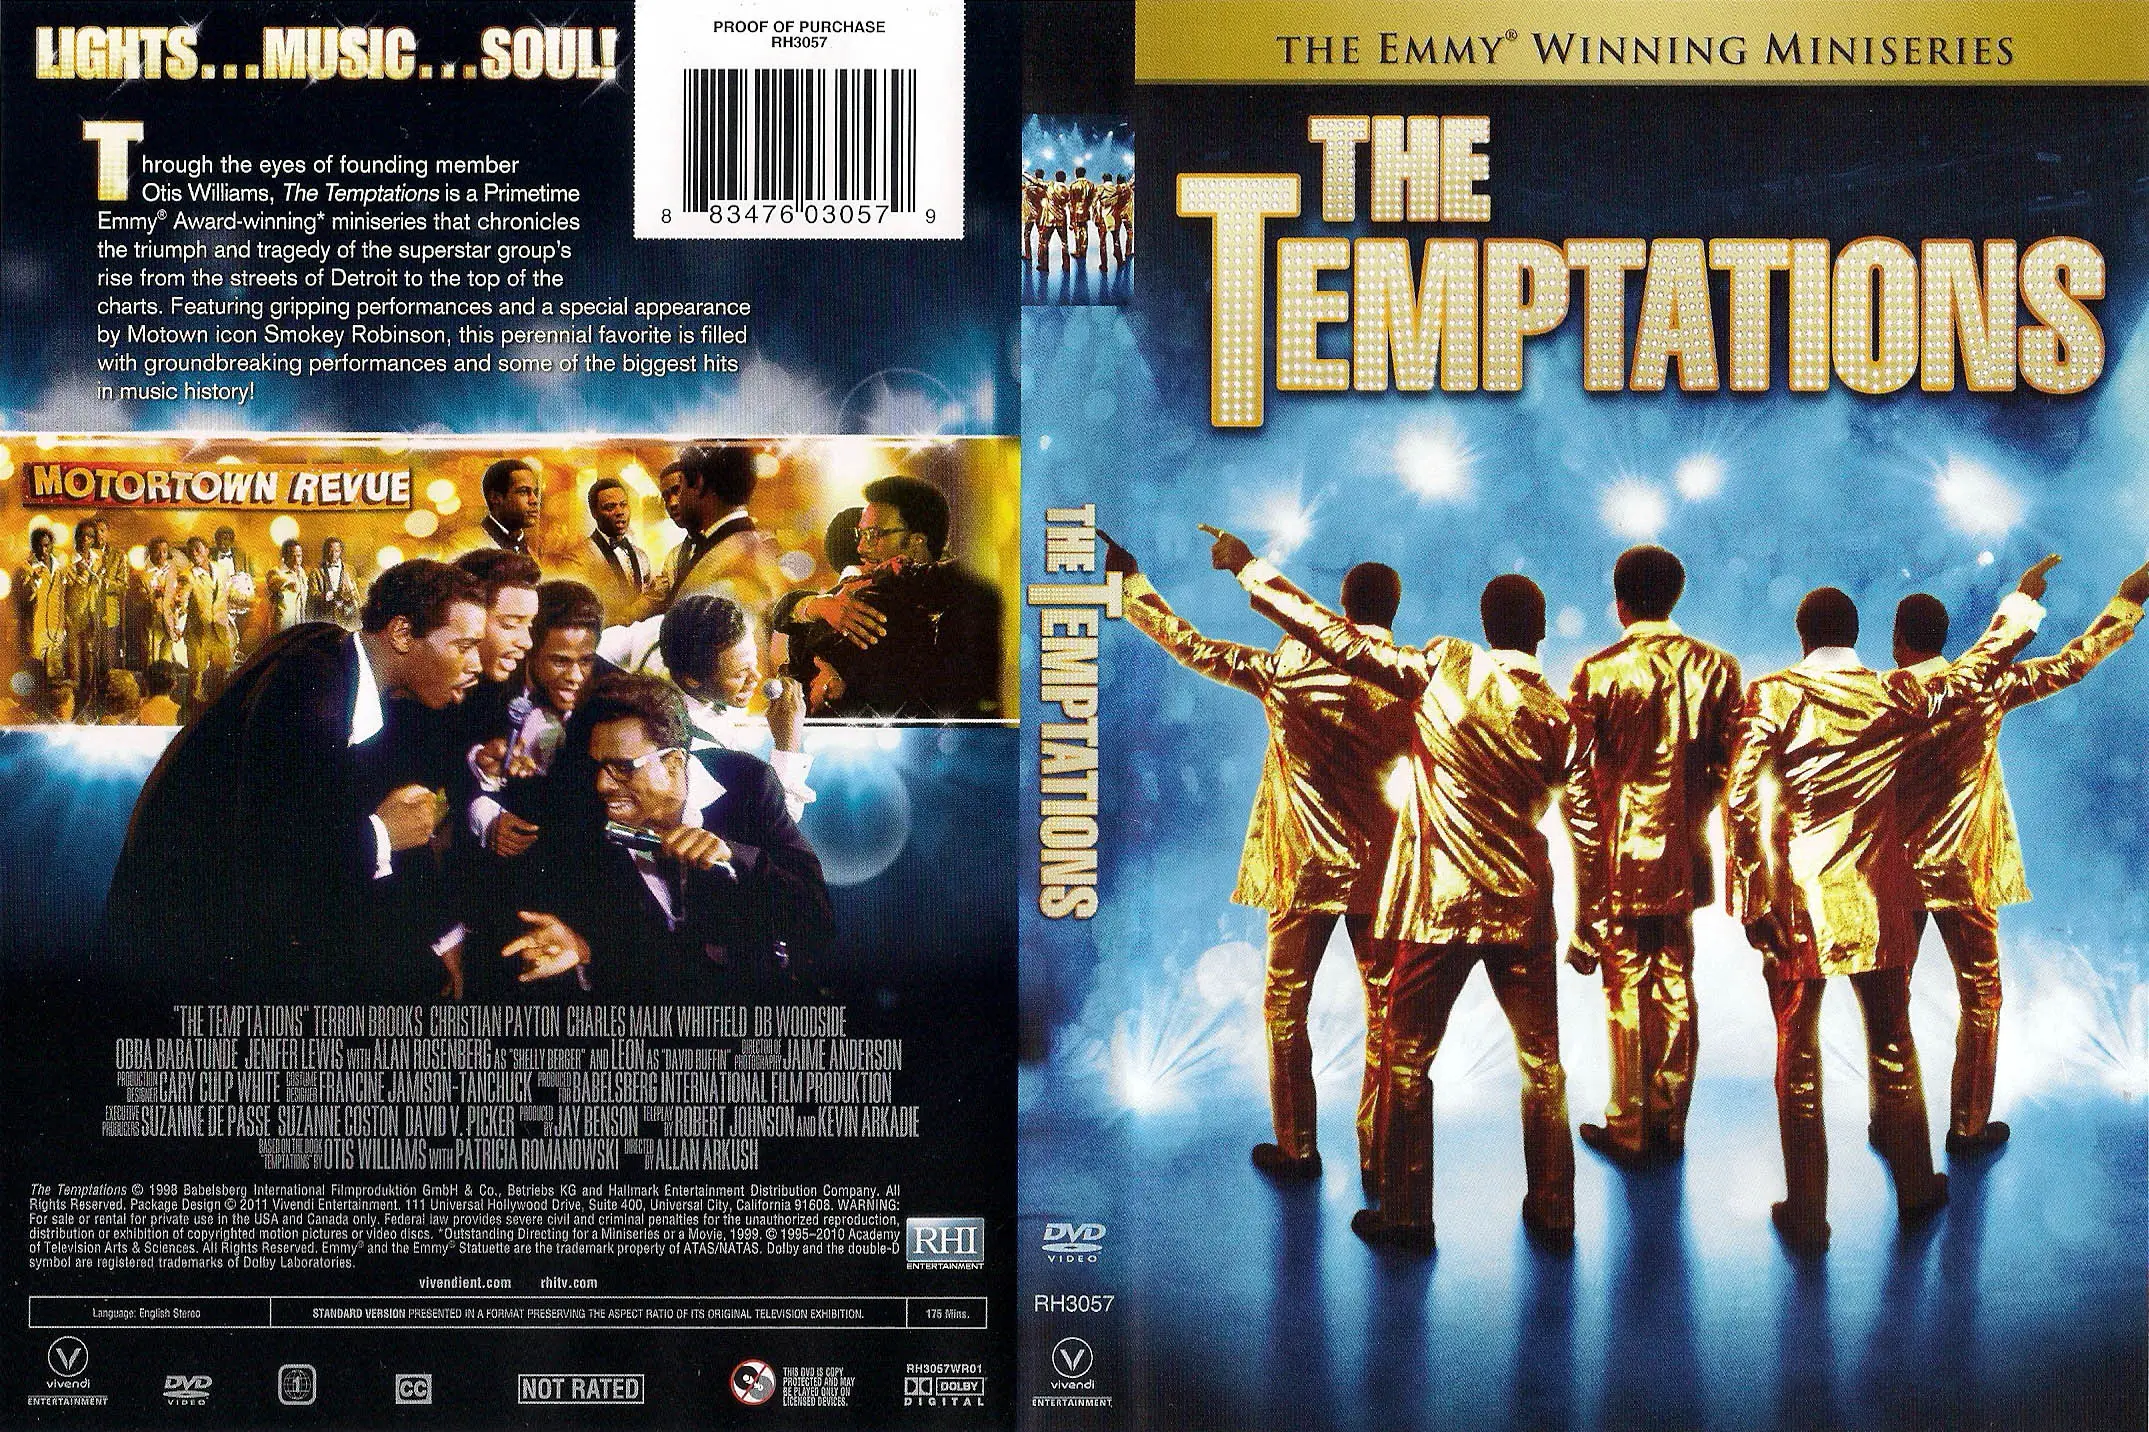 desmond pryce recommends The Temptations 1998 Full Movie